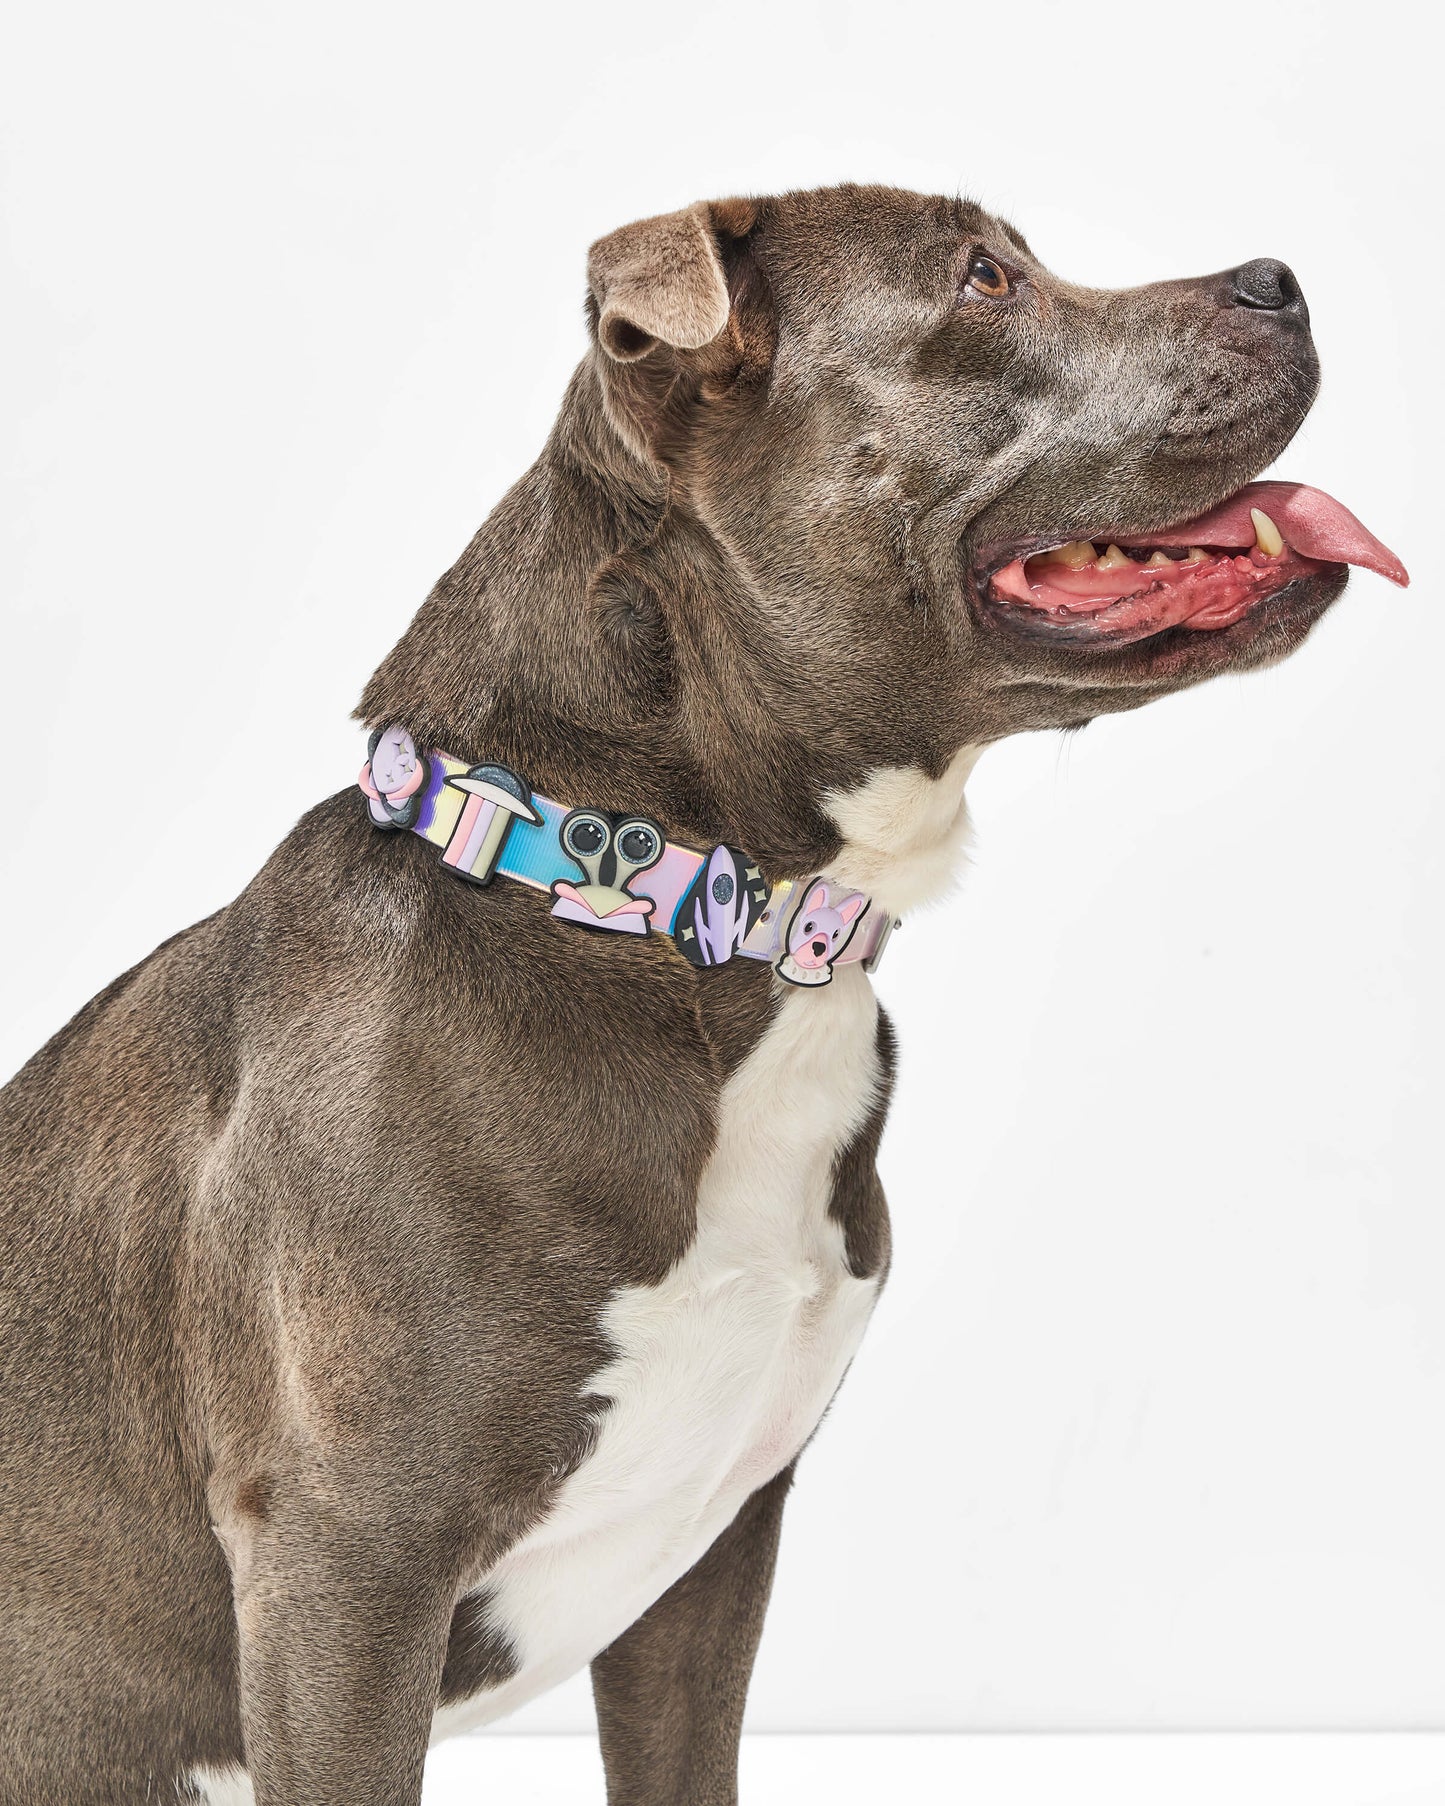 Space | Pair With S-XL Collar, Standard Leash, and XS-S Harness